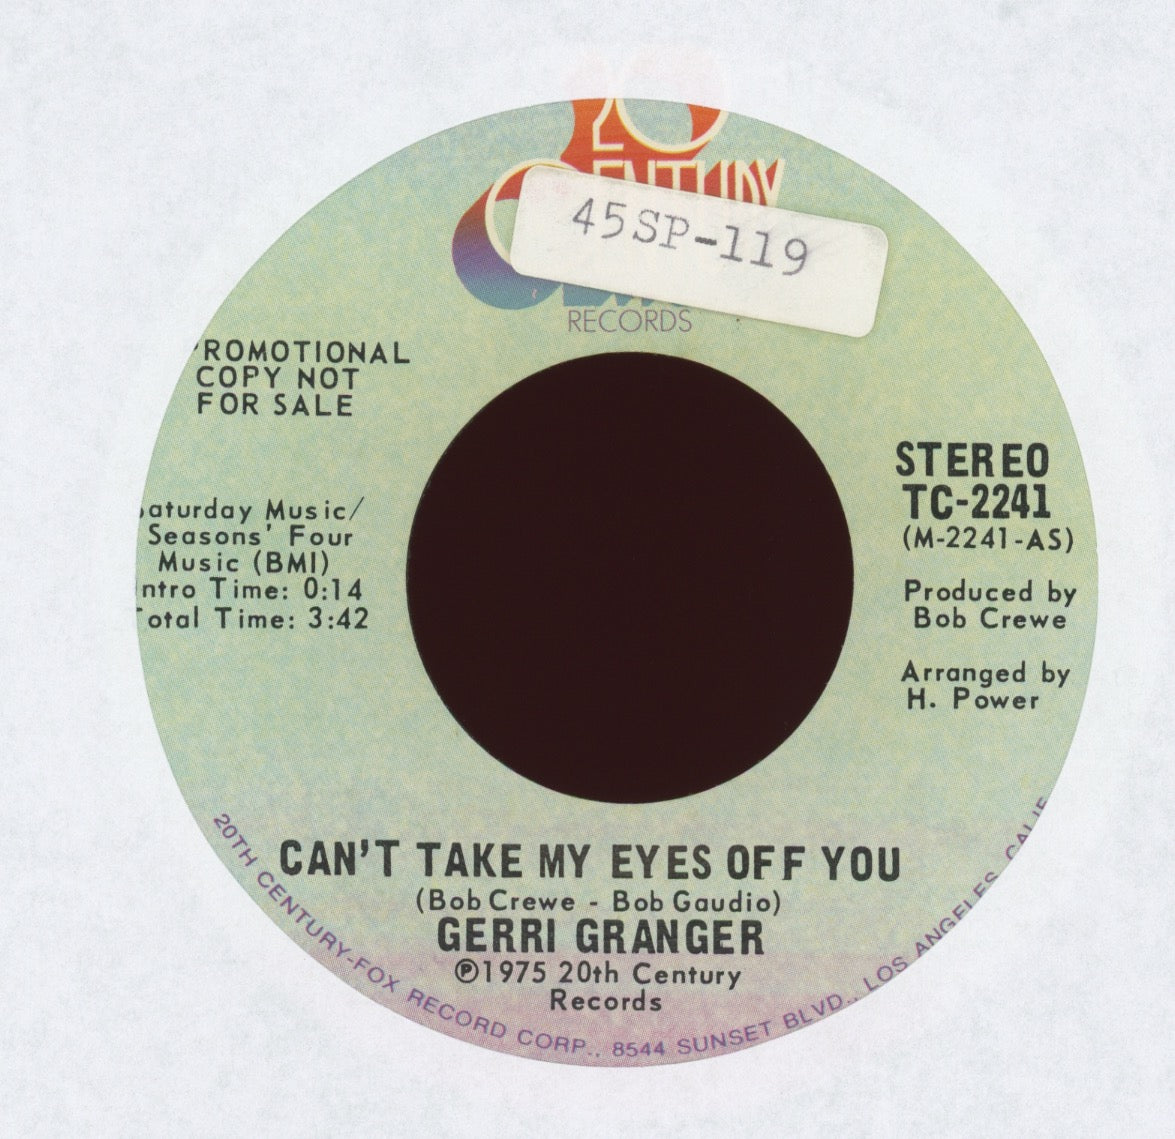 Gerri Granger - Can't Take My Eyes Off You on 20th Century Promo